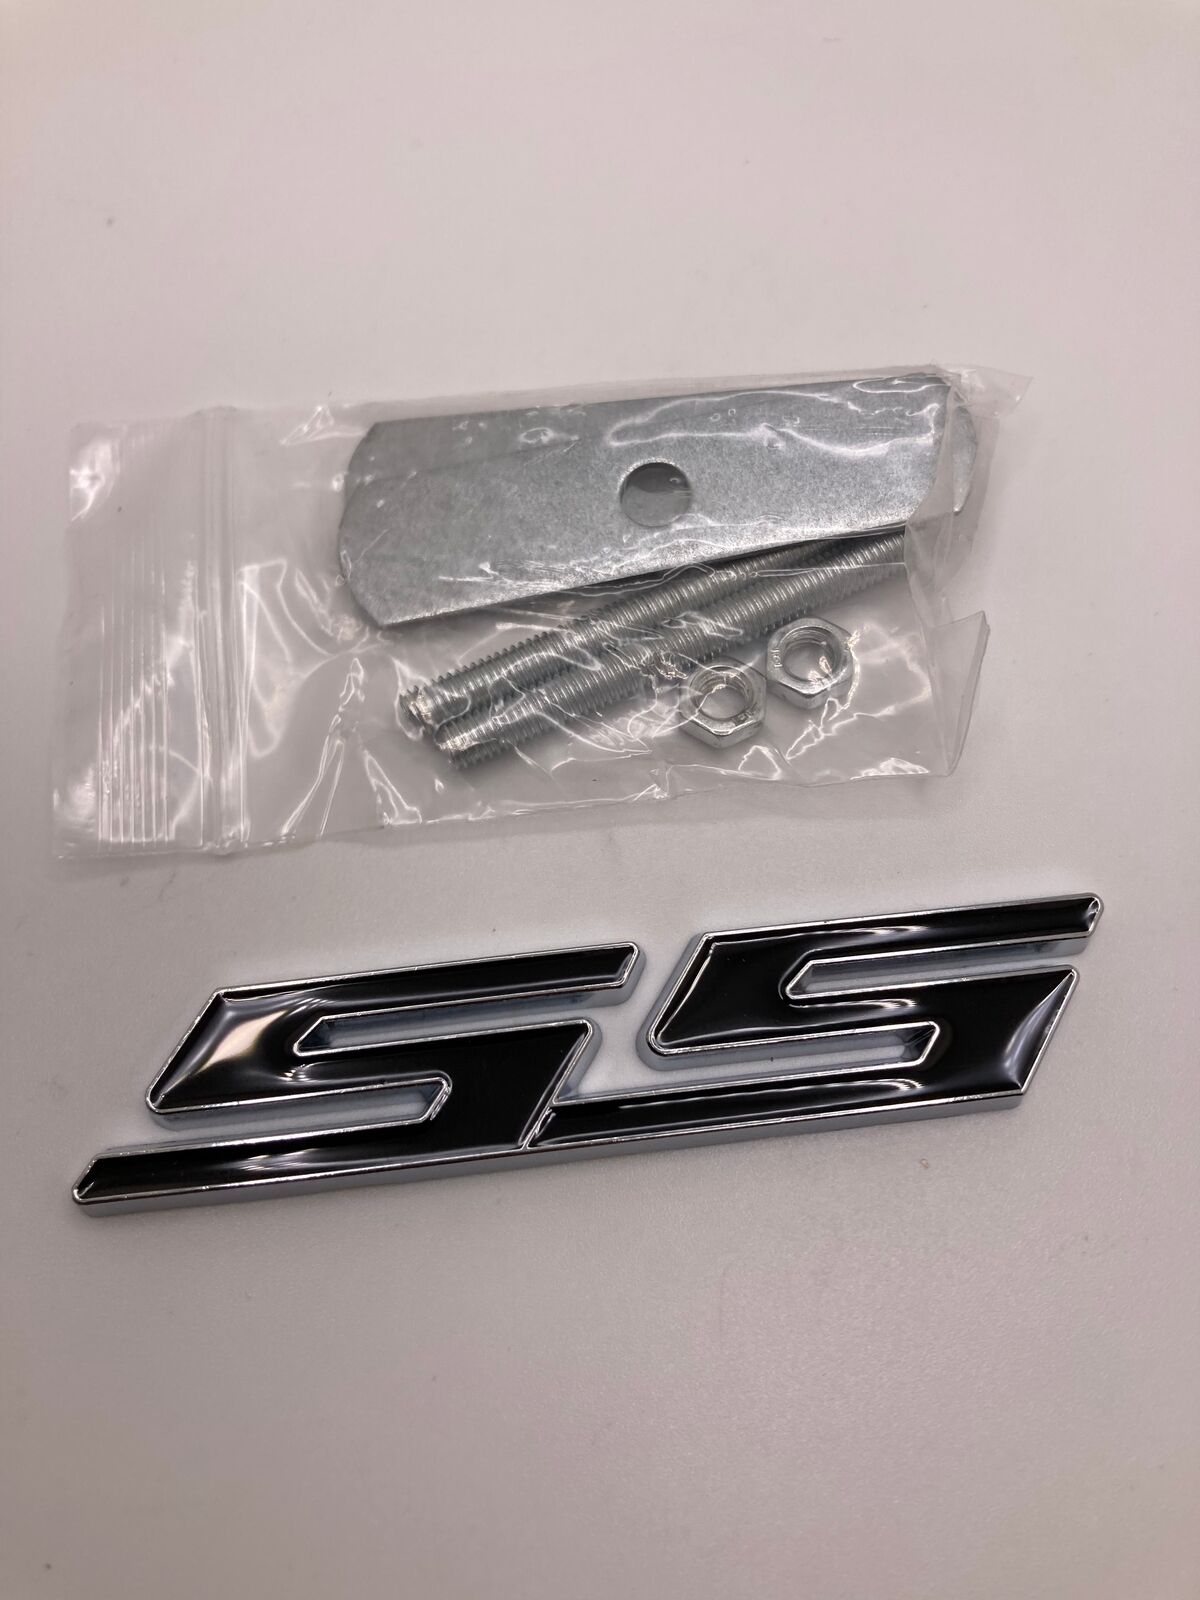 1pcs - SS - 3d Grill Emblem - for Camaro Gm Series Front Grill - Chrome/Black